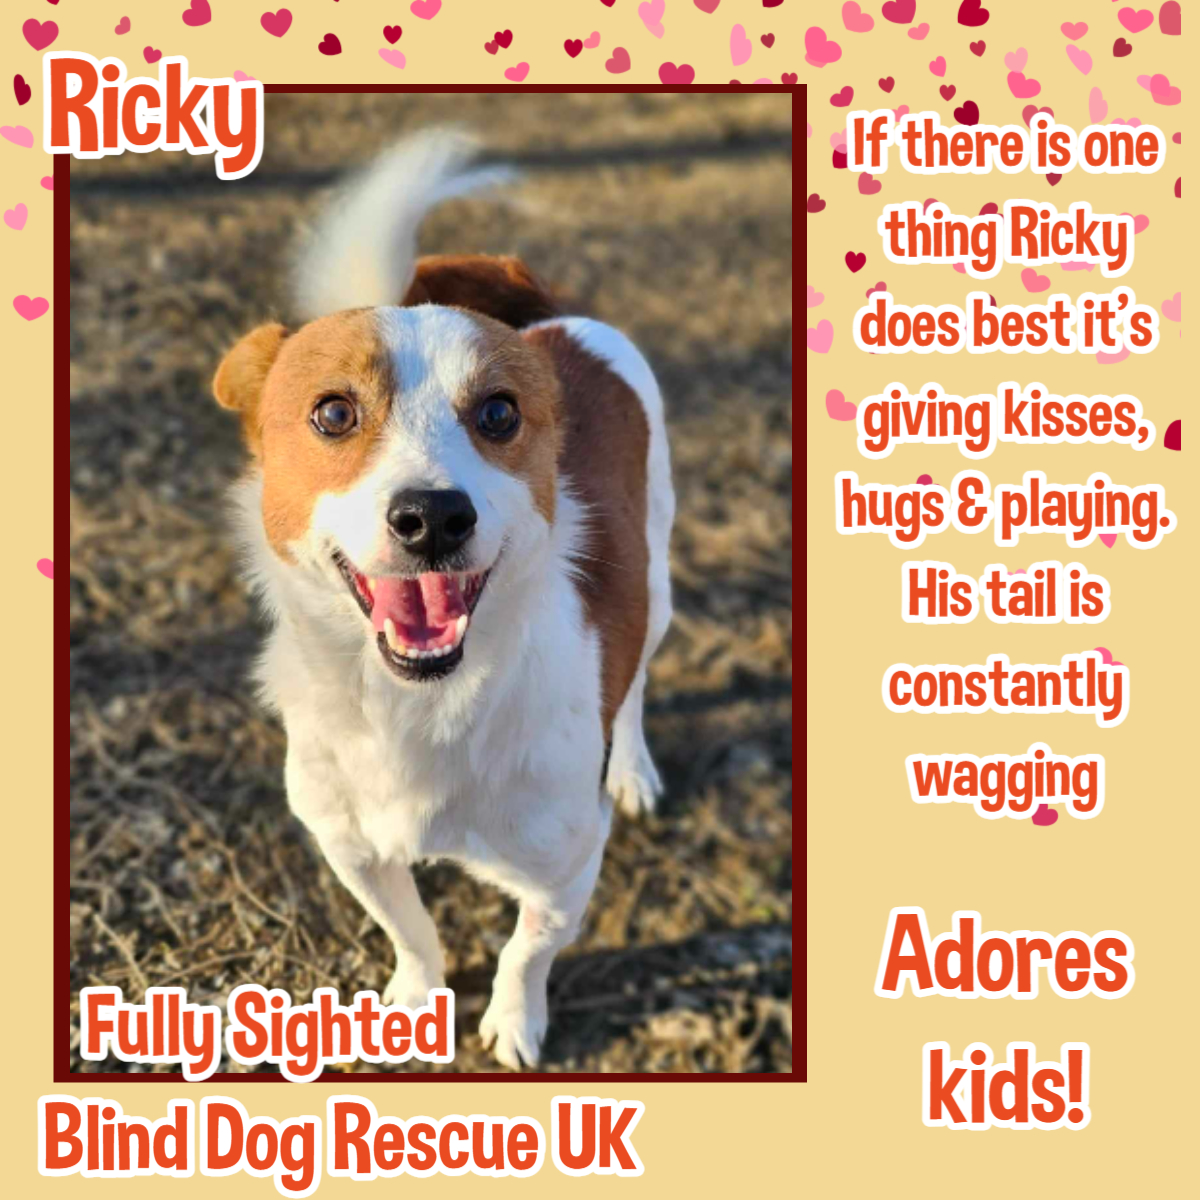 #k9hour 1yo RICKY is a happy little lad who was left without an owner & thrown out on the busiest dangerous street, looking for a human heart to take him home. Despite this, he only knows how to share kisses, play & give hugs. His tail is constantly wagging, giving the sign of